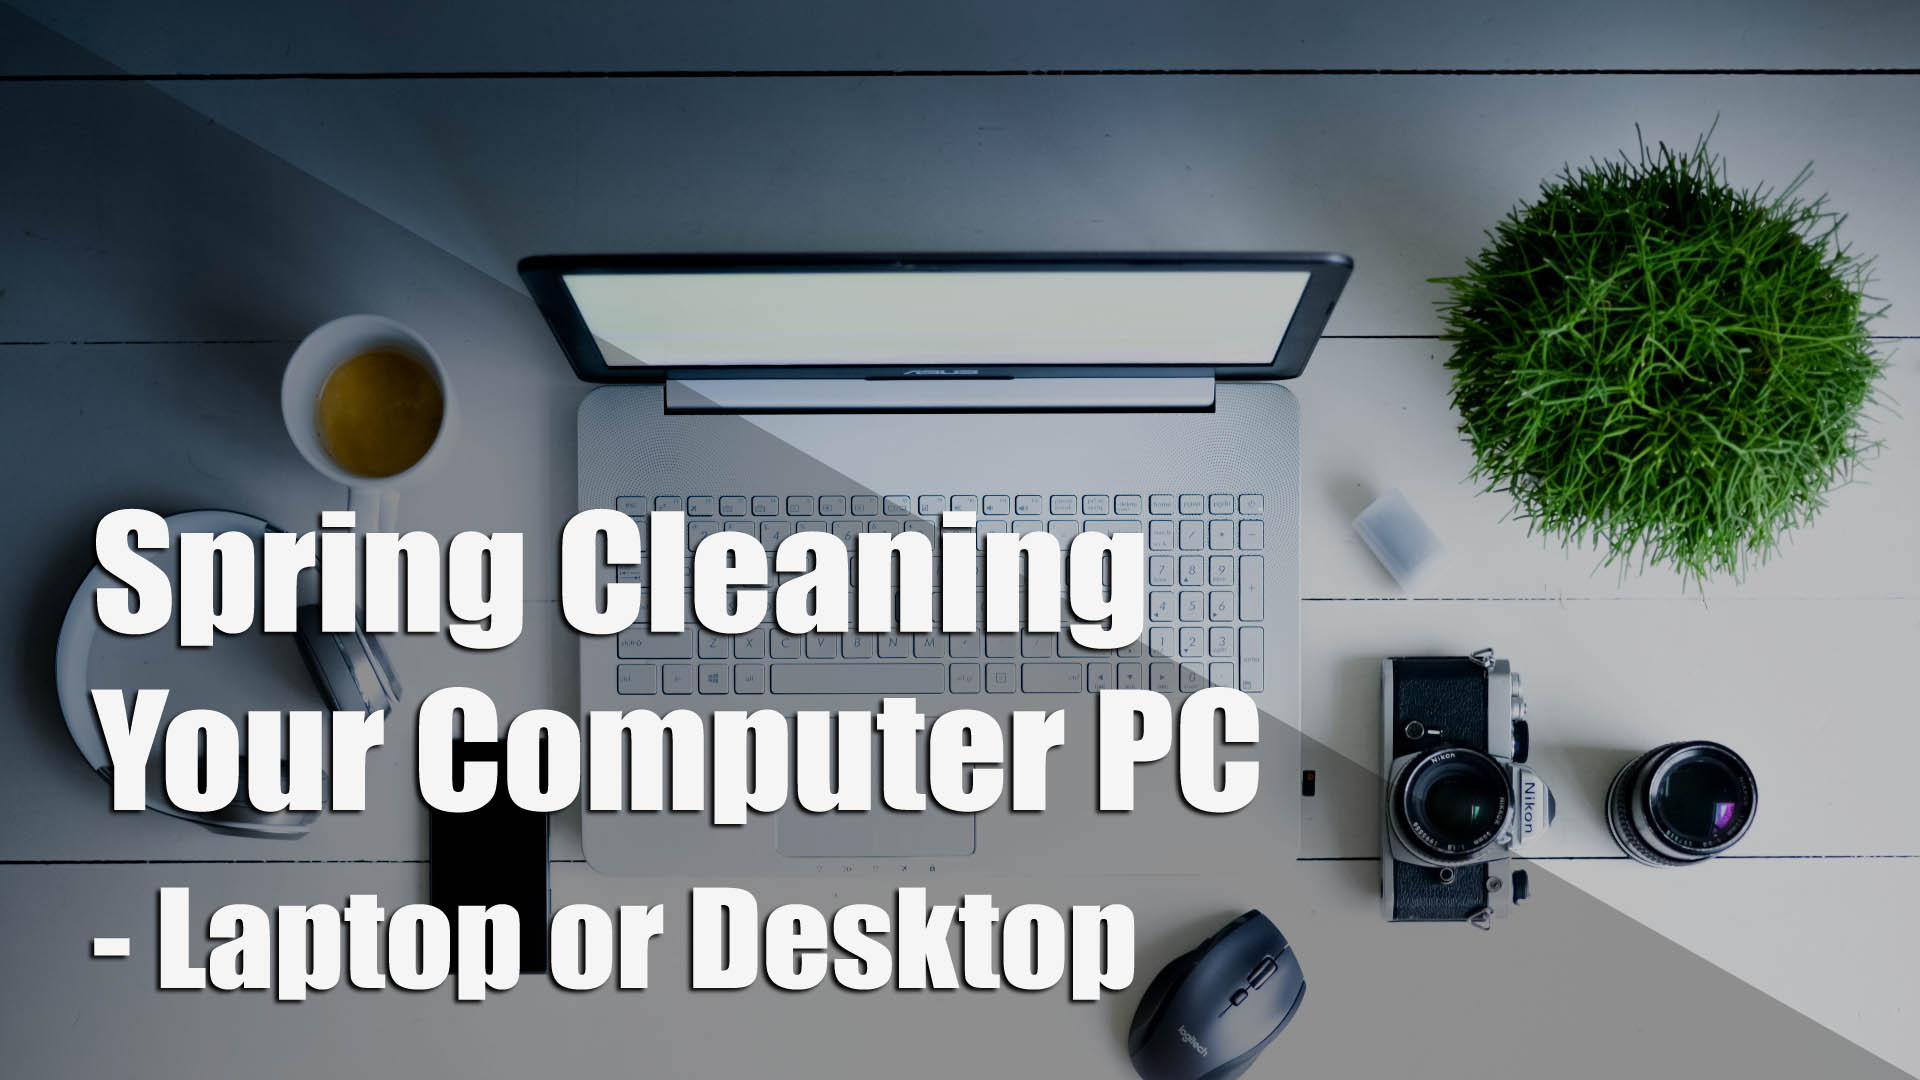 How to Spring Clean Your Windows PC